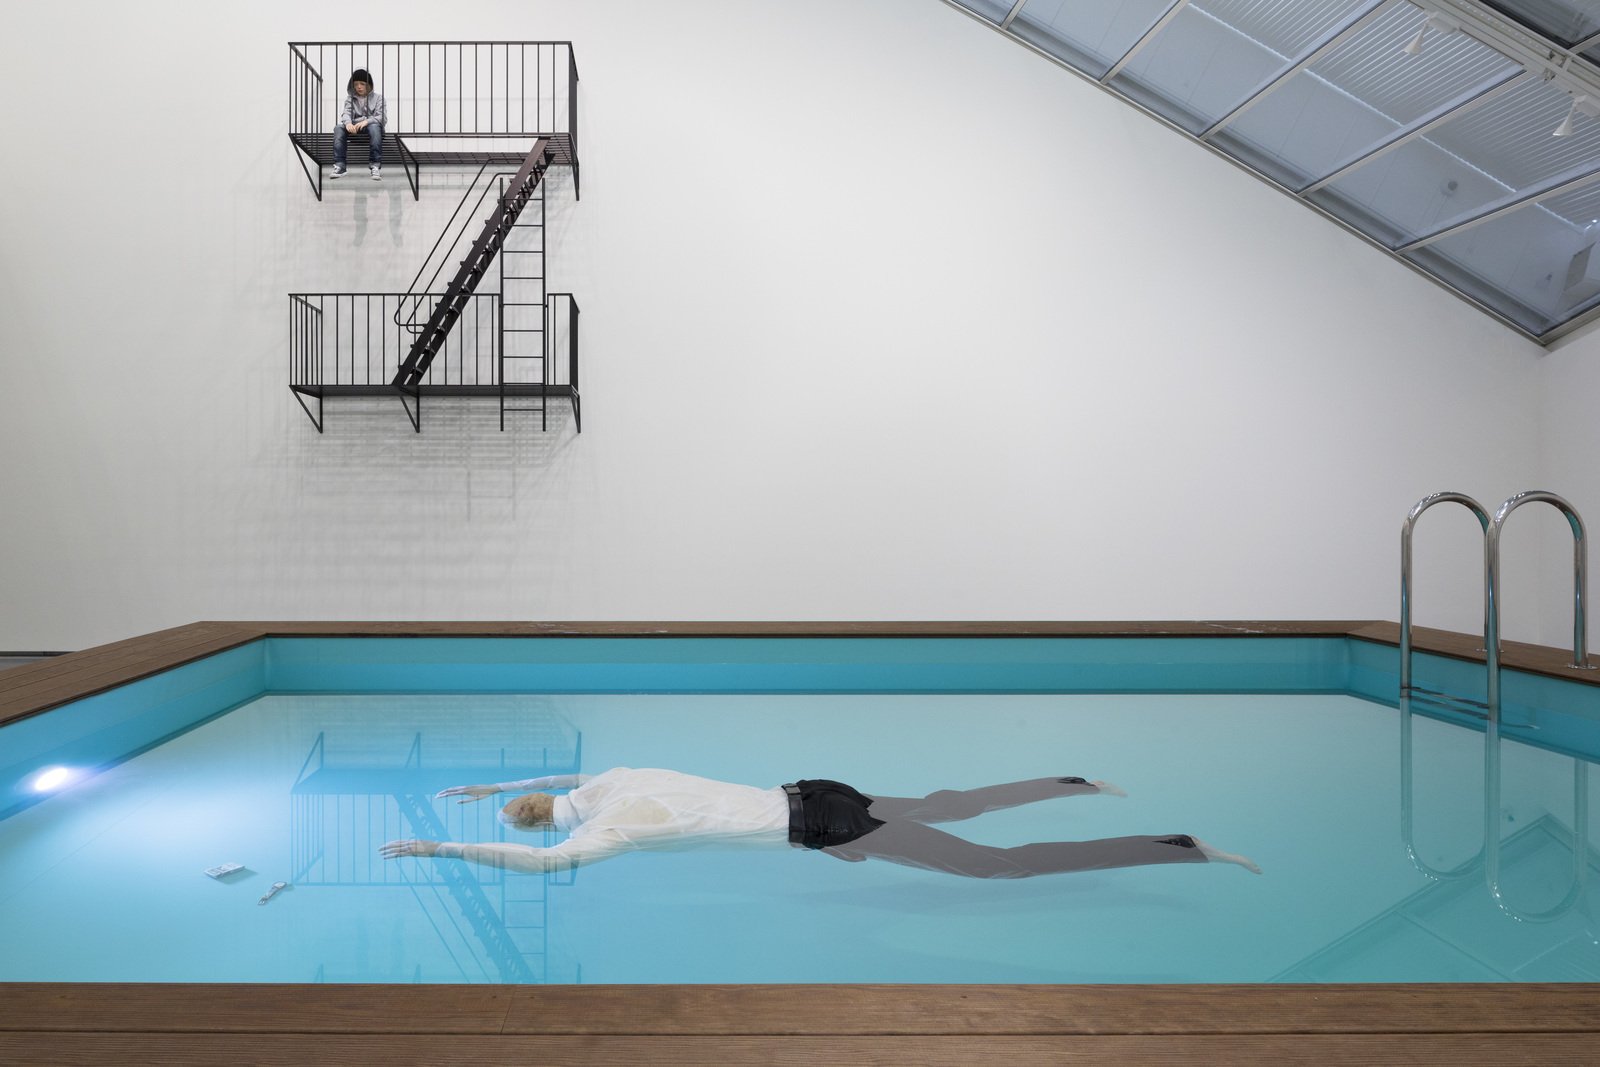 Elmgreen &amp; Dragset. Death of a Collector. 2009. Astrup Fearnley Museum of Modern Art, Oslo, Norway